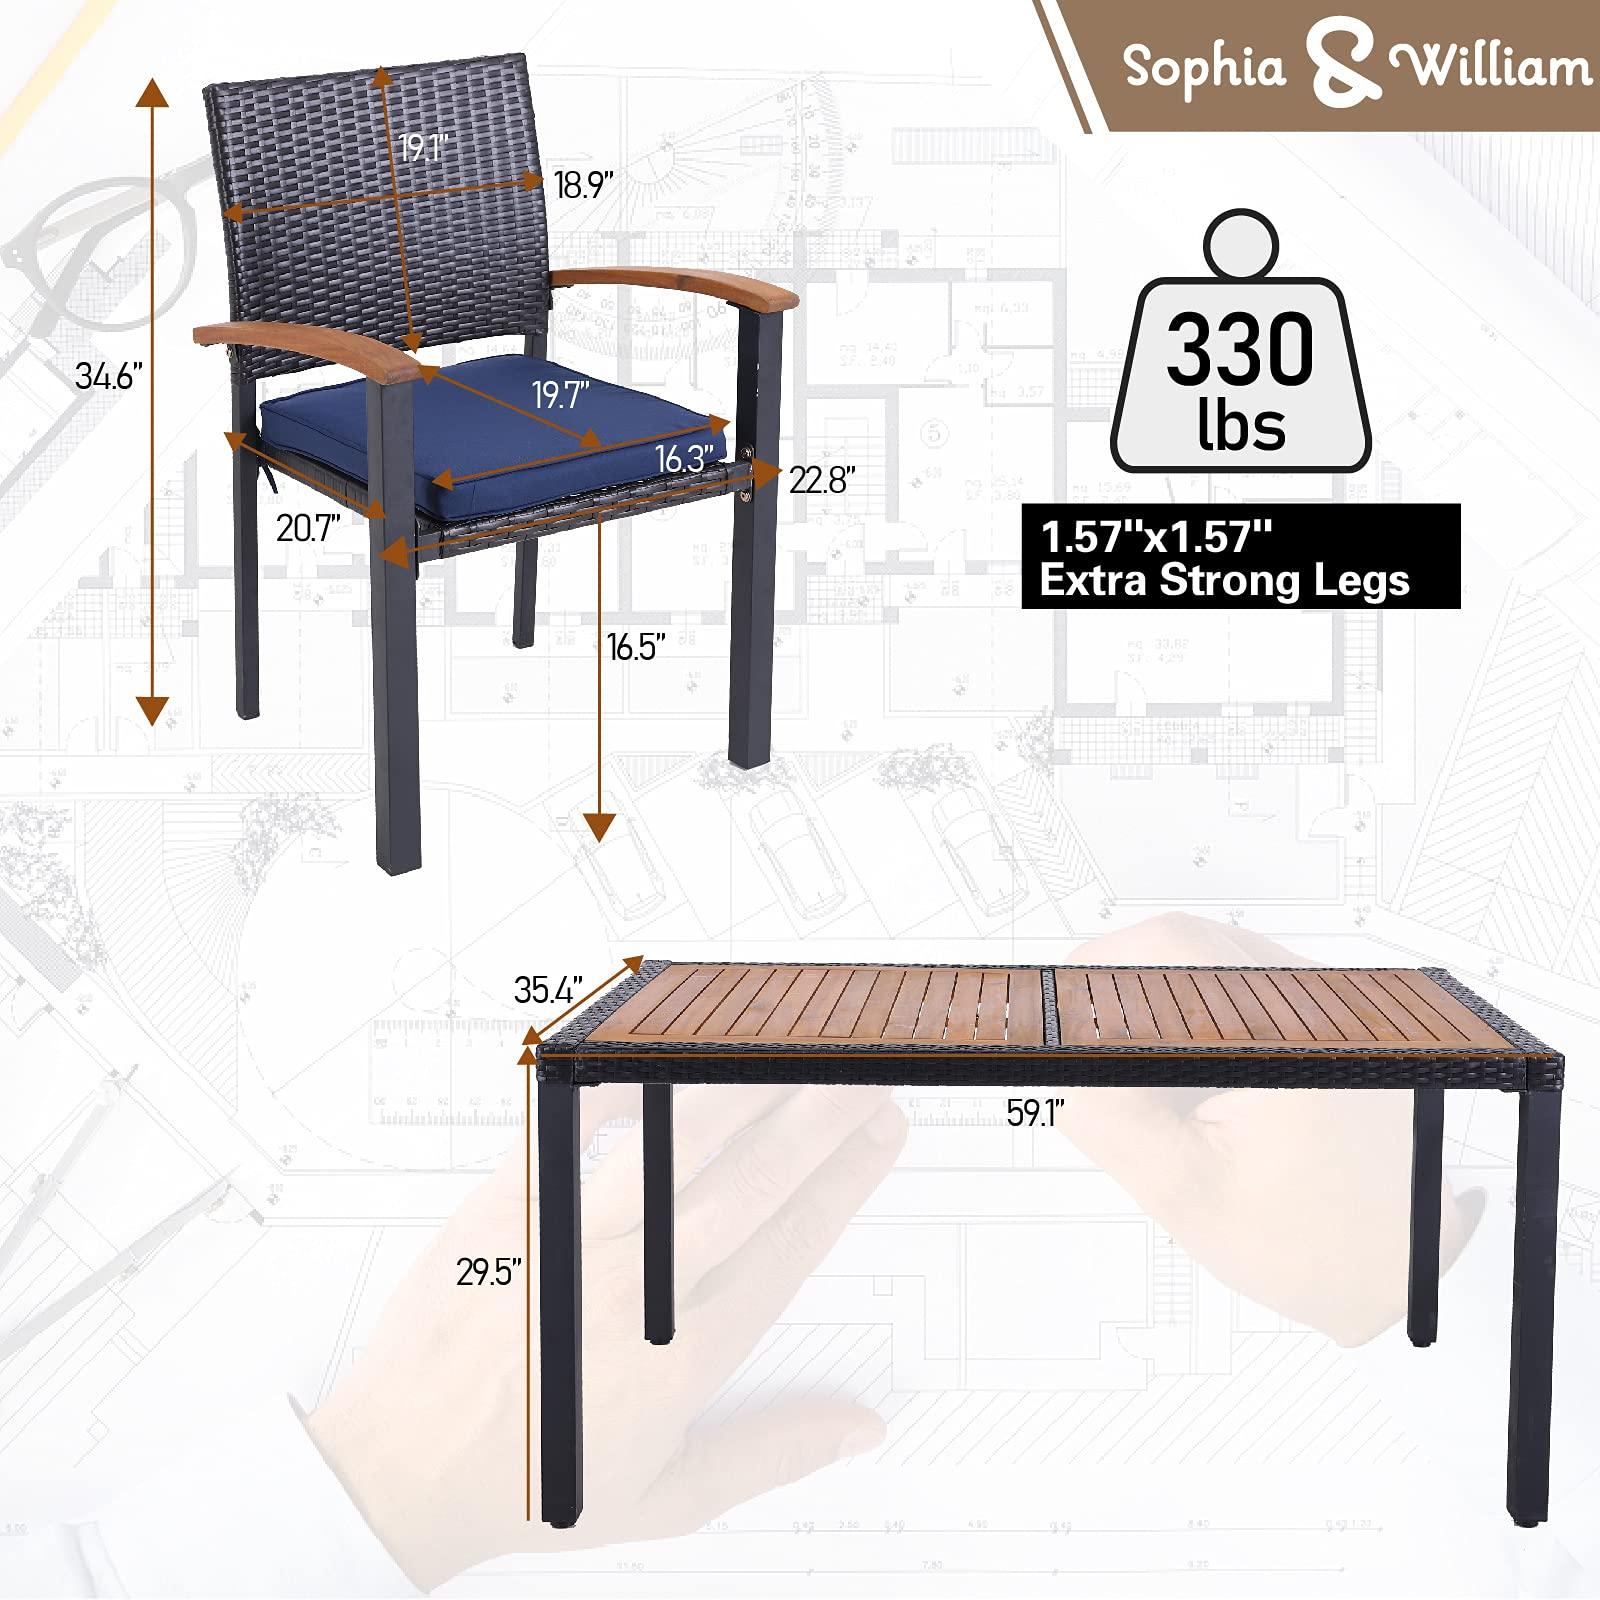 Sophia & William Outdoor Patio Dining Set Furniture 7 Pieces with 6 Stackable Cushioned Rattan Wicker Chairs and Rectangular Acacia Wood Table for Backyard Deck Garden Lawn Porch Poolside - CookCave